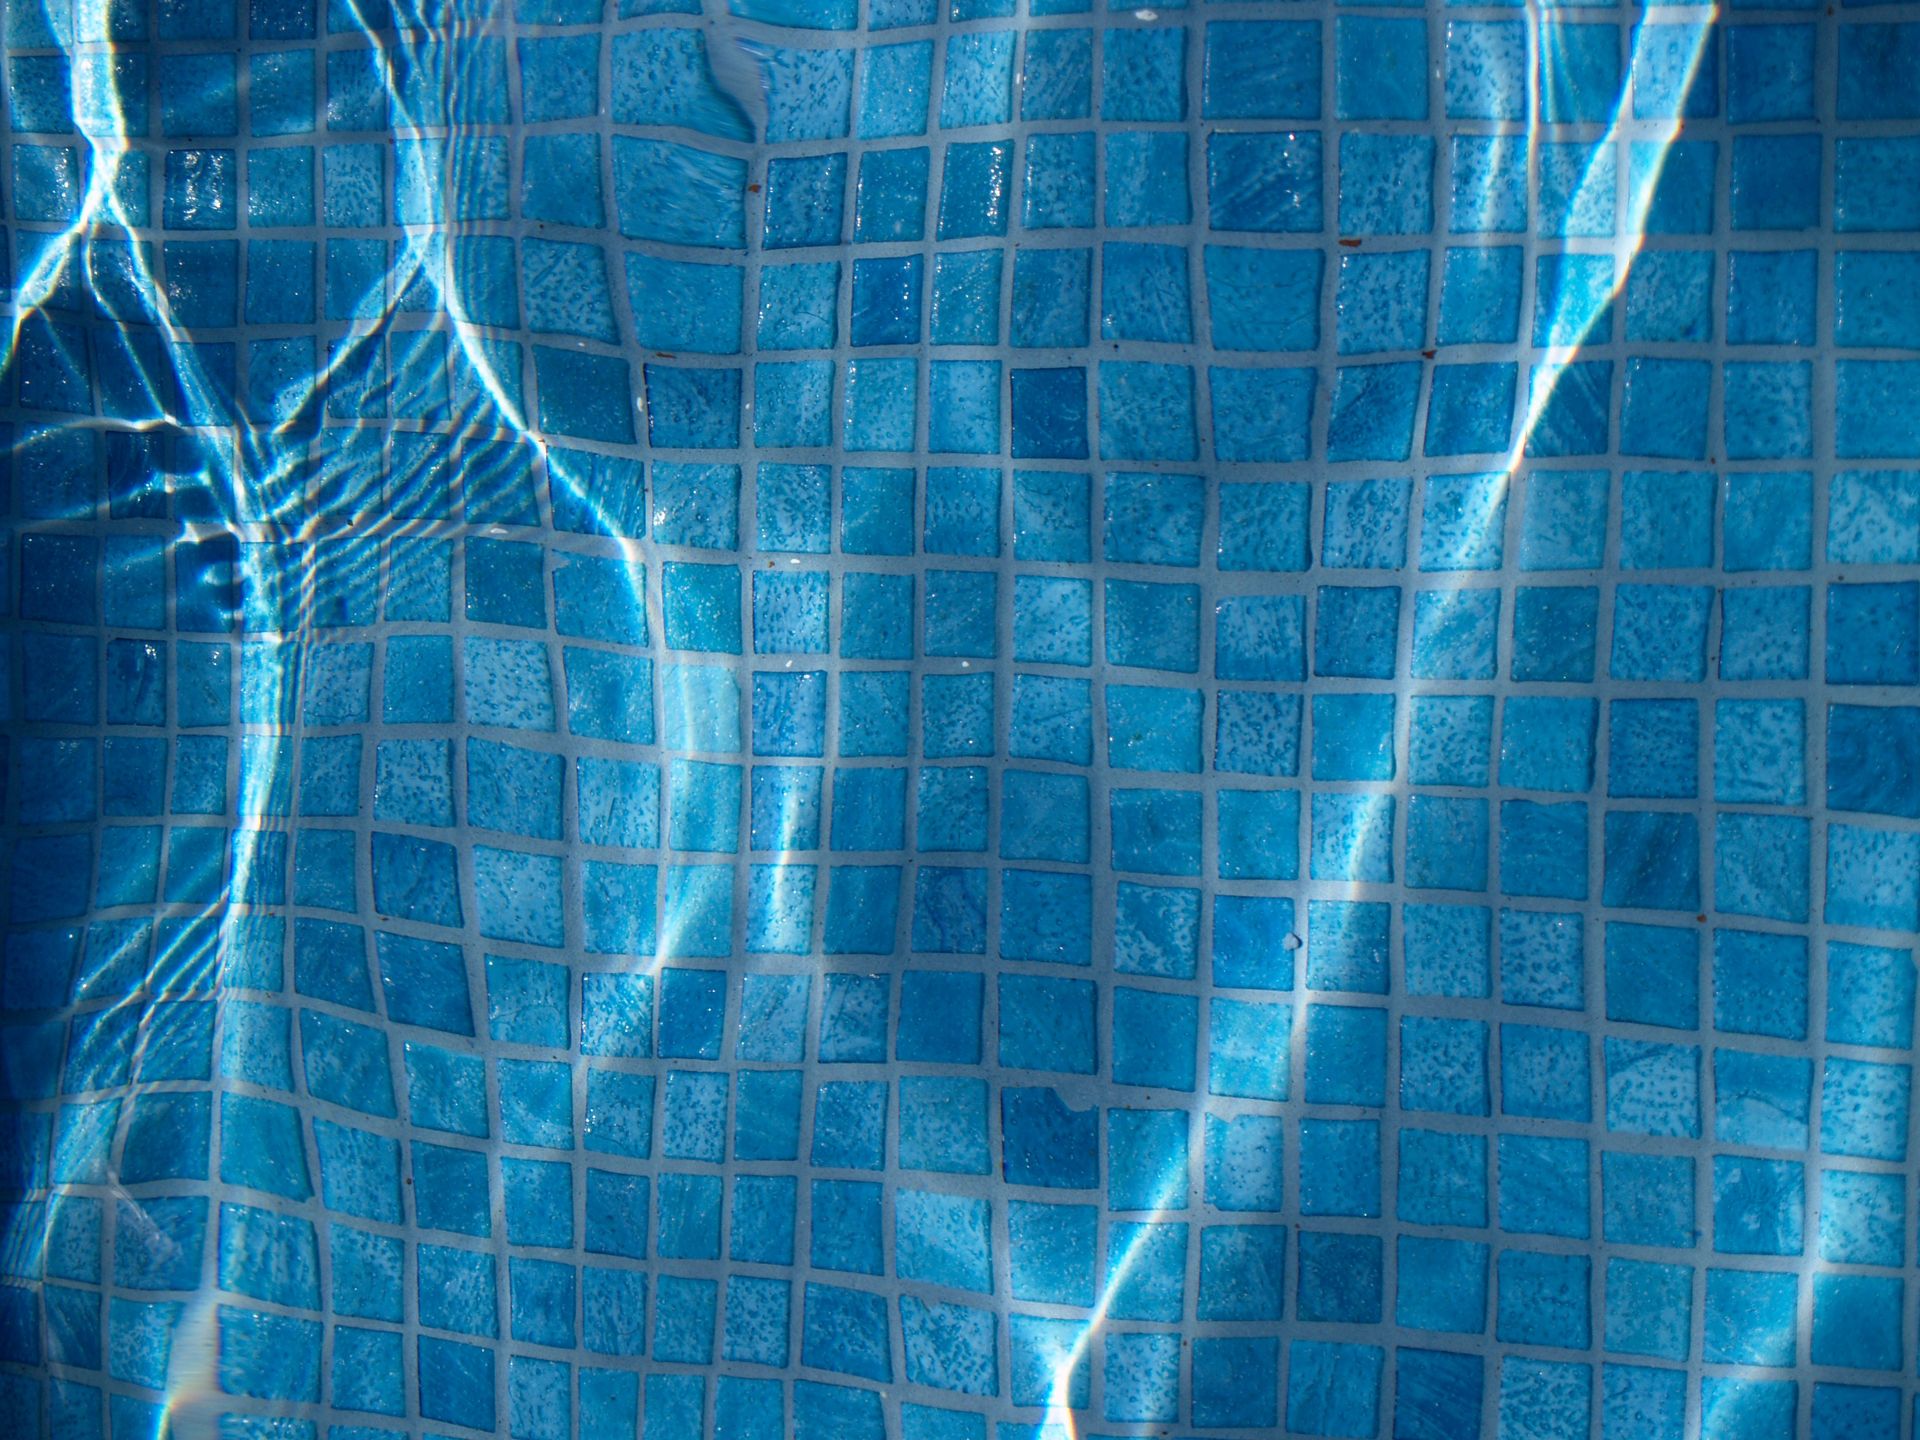 Water reflecting on blue tiles at the bottom of a pool.